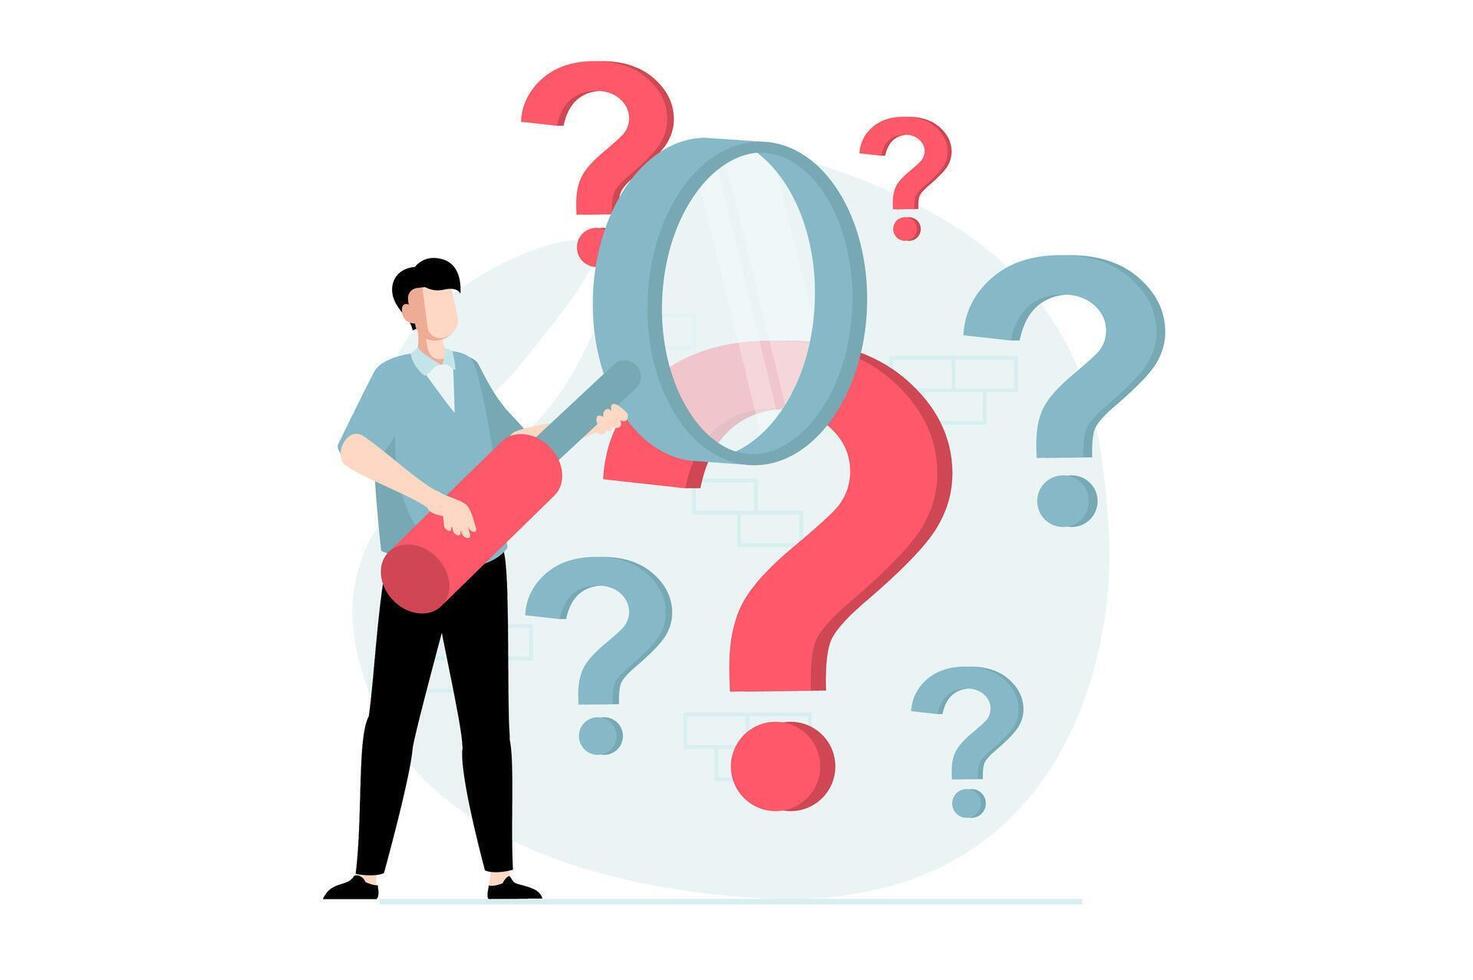 Finding solution concept with people scene in flat design. Man with magnifier looking questions and finds answers, imagination and inspiration. illustration with character situation for web vector